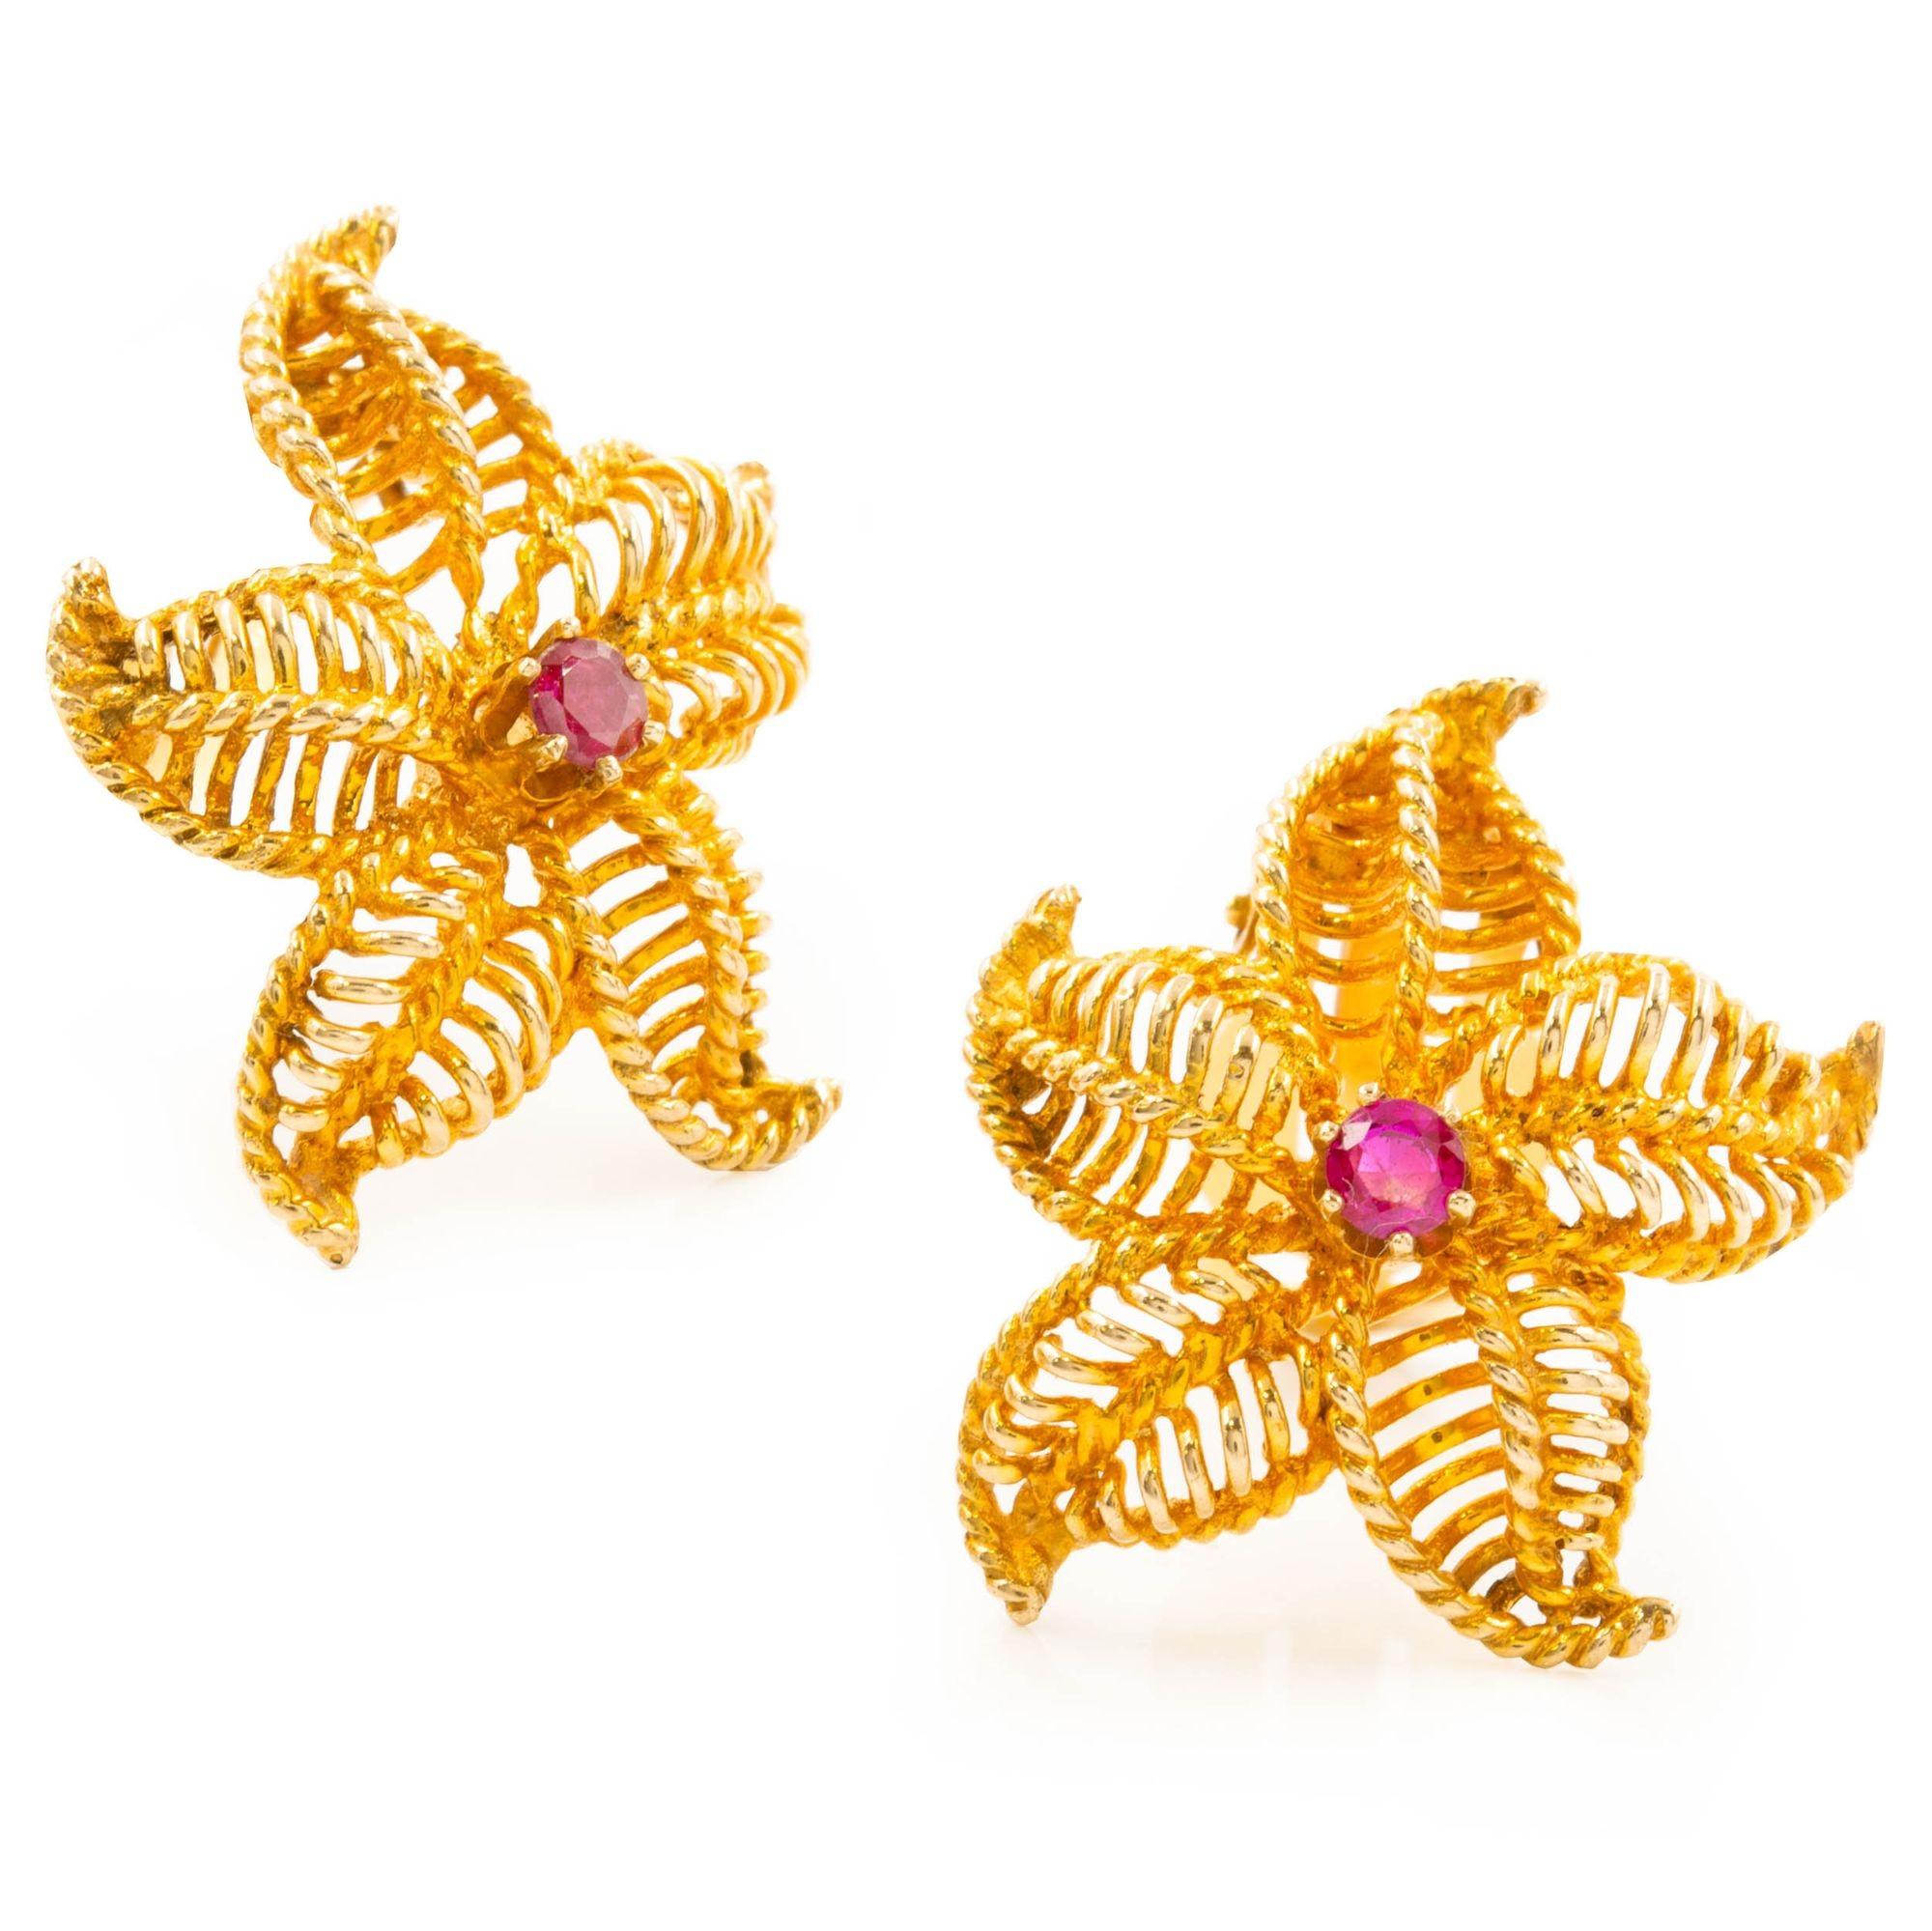 Pair of 14K Yellow Gold & Gemstone Starfish Earrings
Item # C104608

Intricately designed earrings that resemble starfish made of 14K yellow gold. Each earring is adorned with a centrally placed gemstone. The texture and the way the gold is